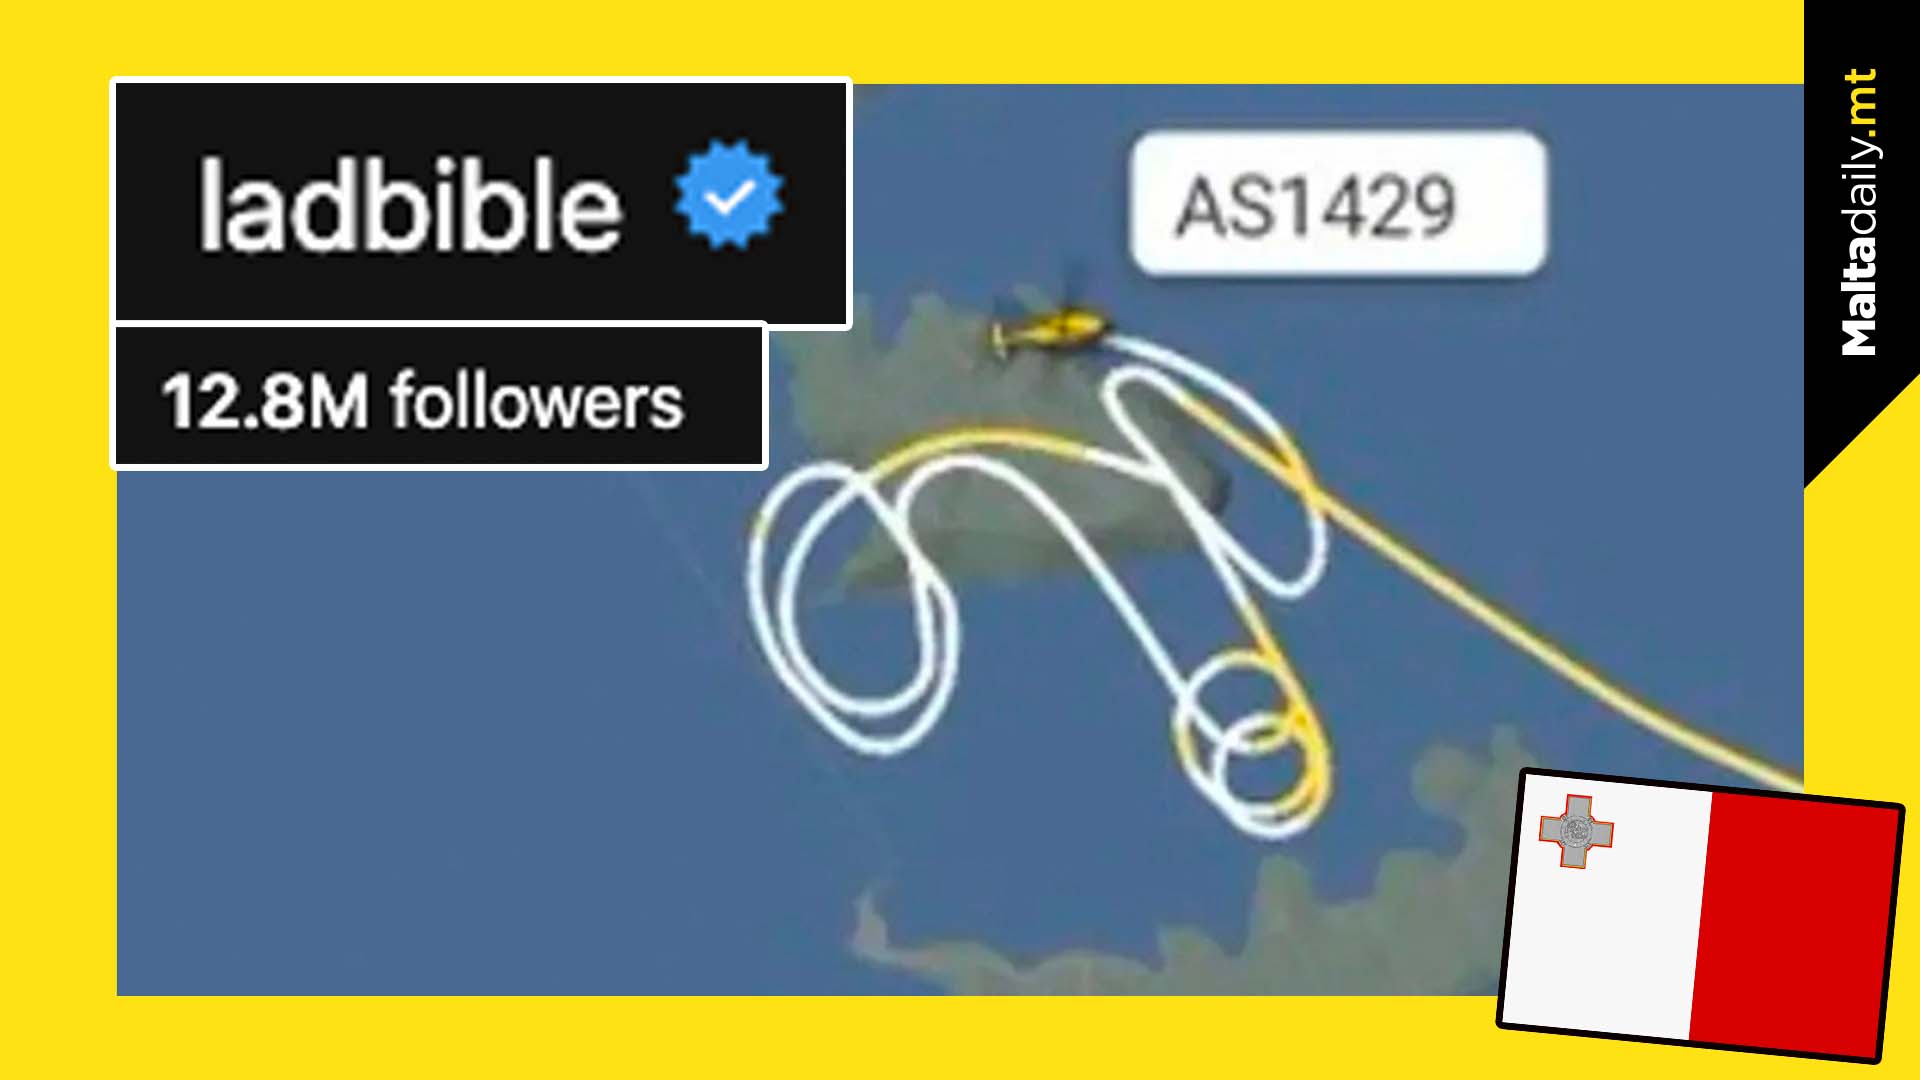 LadBible features Maltese AFM helicopter ‘penis drawing’